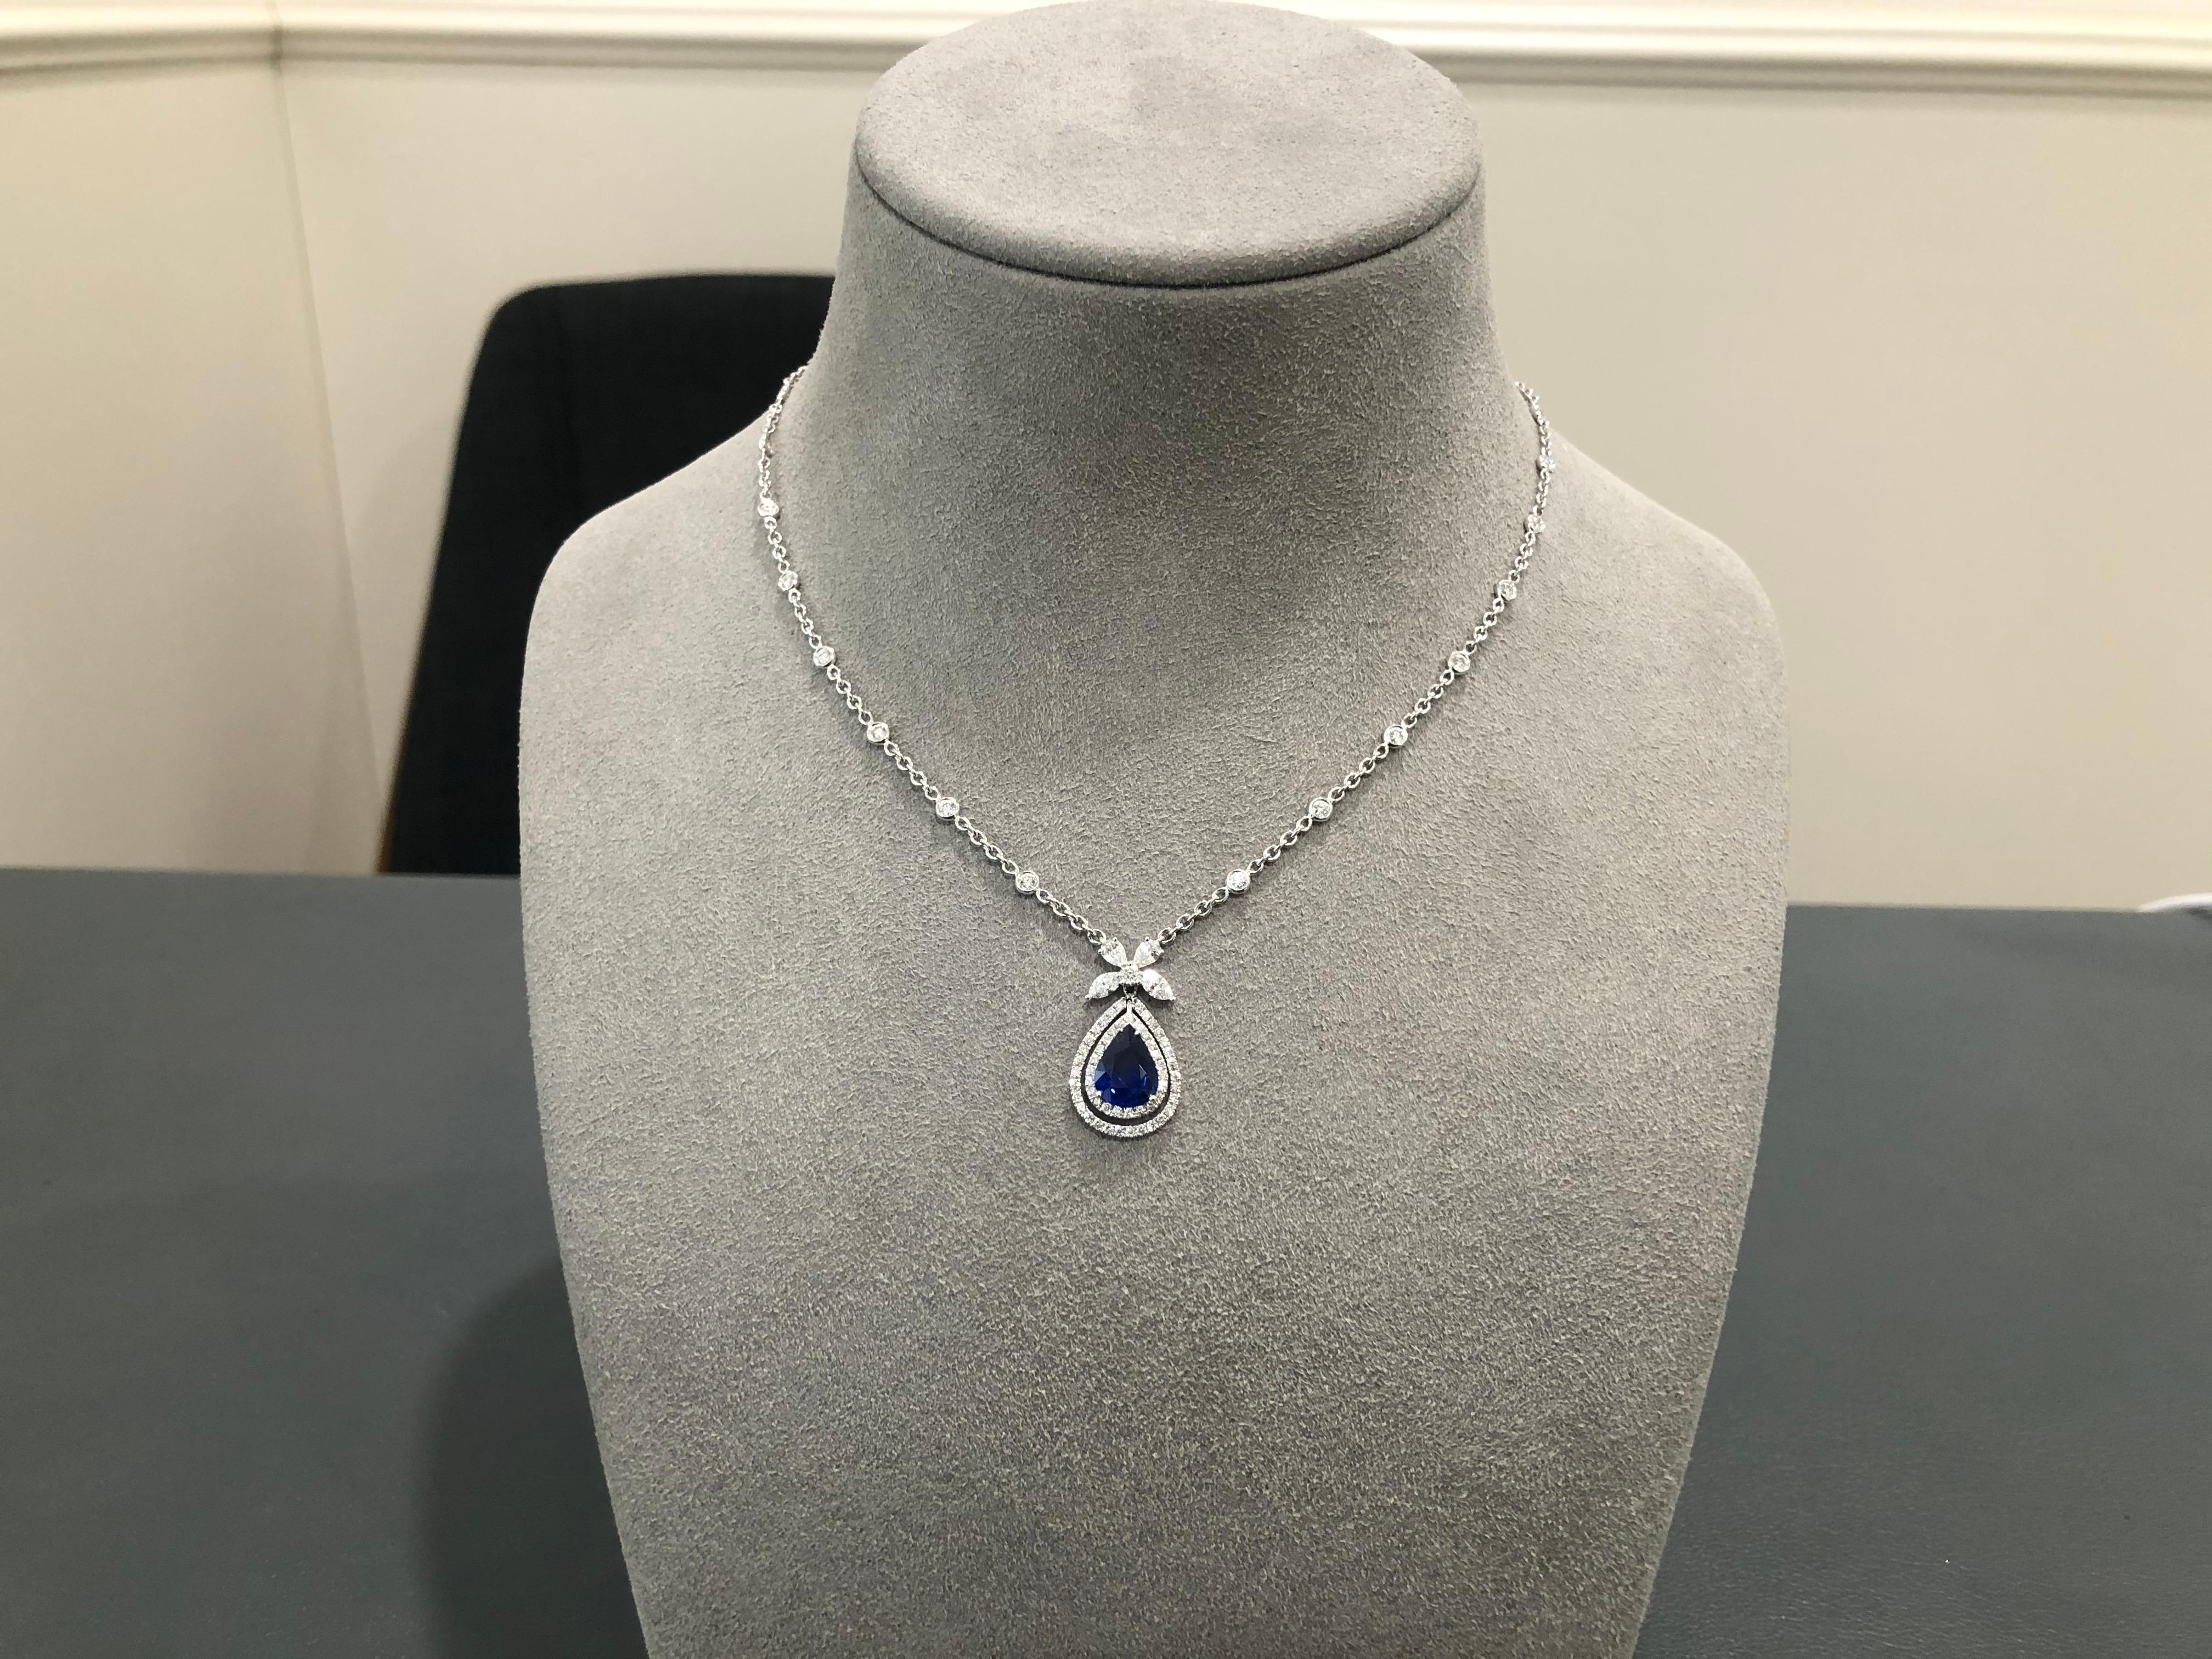 Features a 1.88 carat pear shape blue sapphire center accented by two rows of round brilliant diamonds. Suspended on a  pear and marquise cut diamond surmount attached to a diamonds by the yard chain in 18k white gold. Weight of the diamonds 1.44